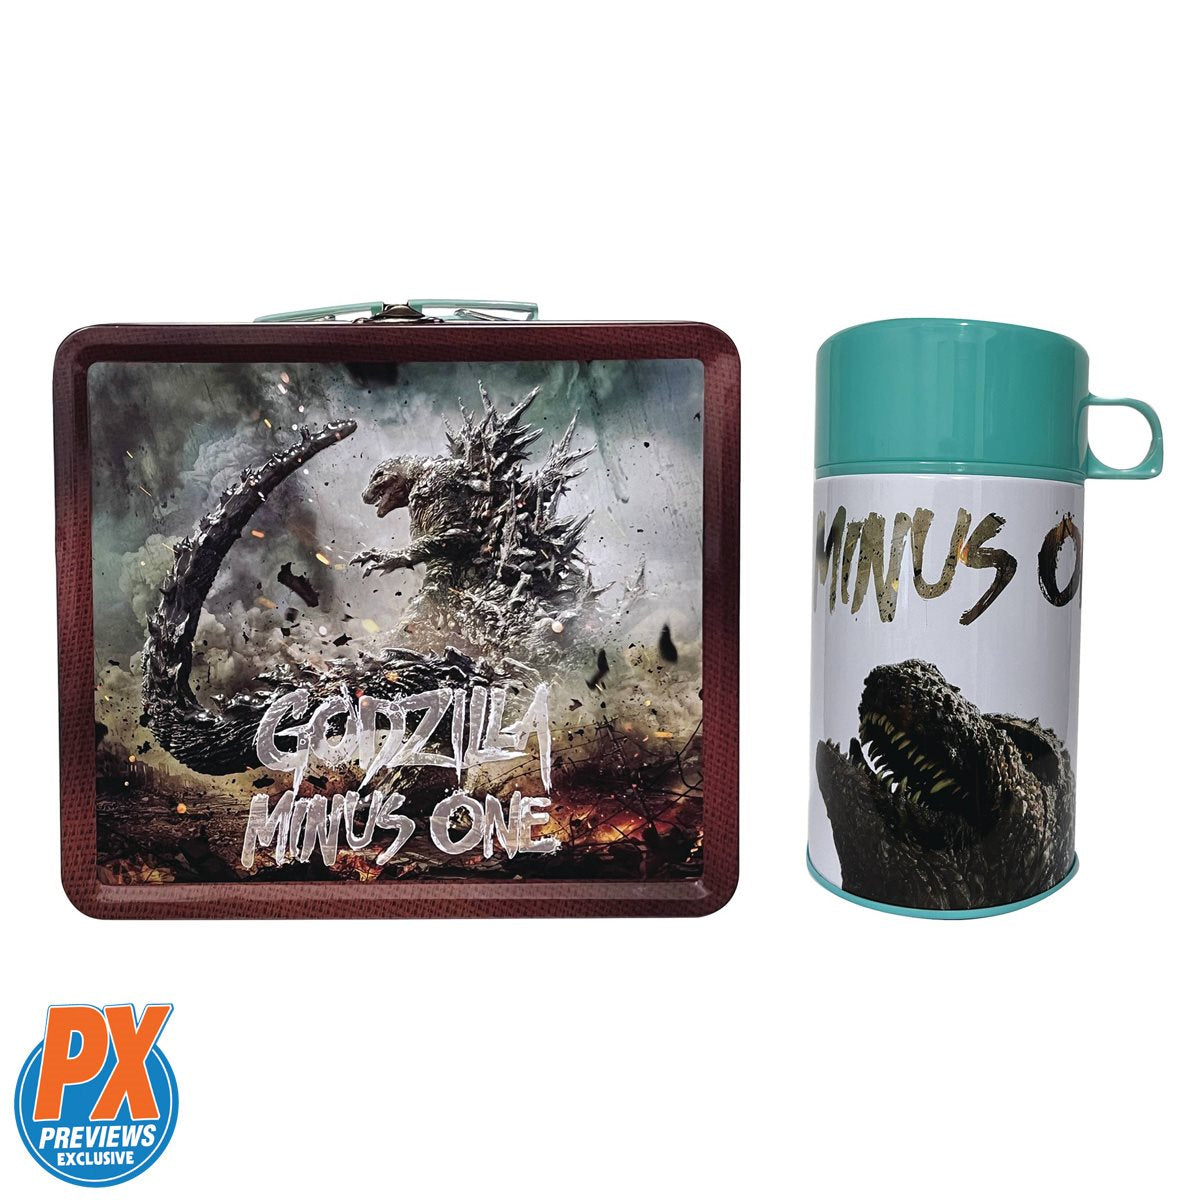 Godzilla Minus One Tin Titans Lunch Box with Thermos - Previews Exclusive LE 2500